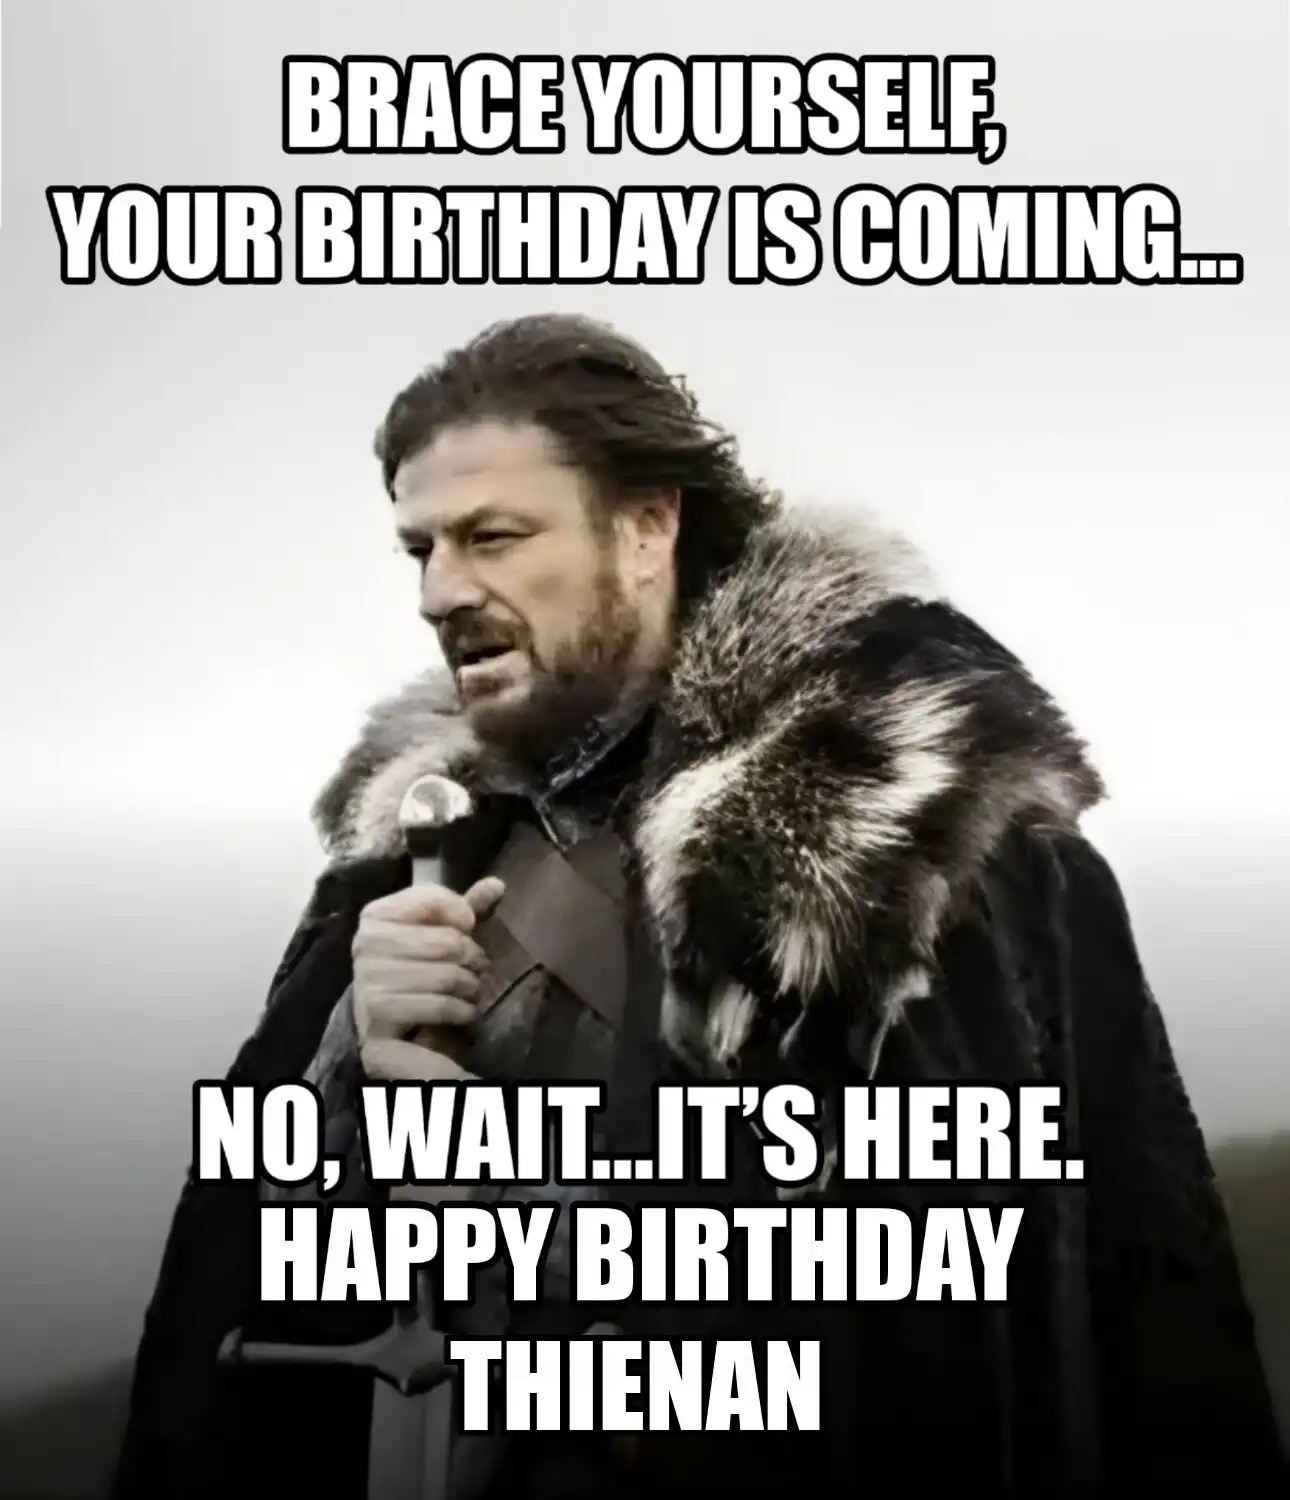 Happy Birthday Thienan Brace Yourself Your Birthday Is Coming Meme